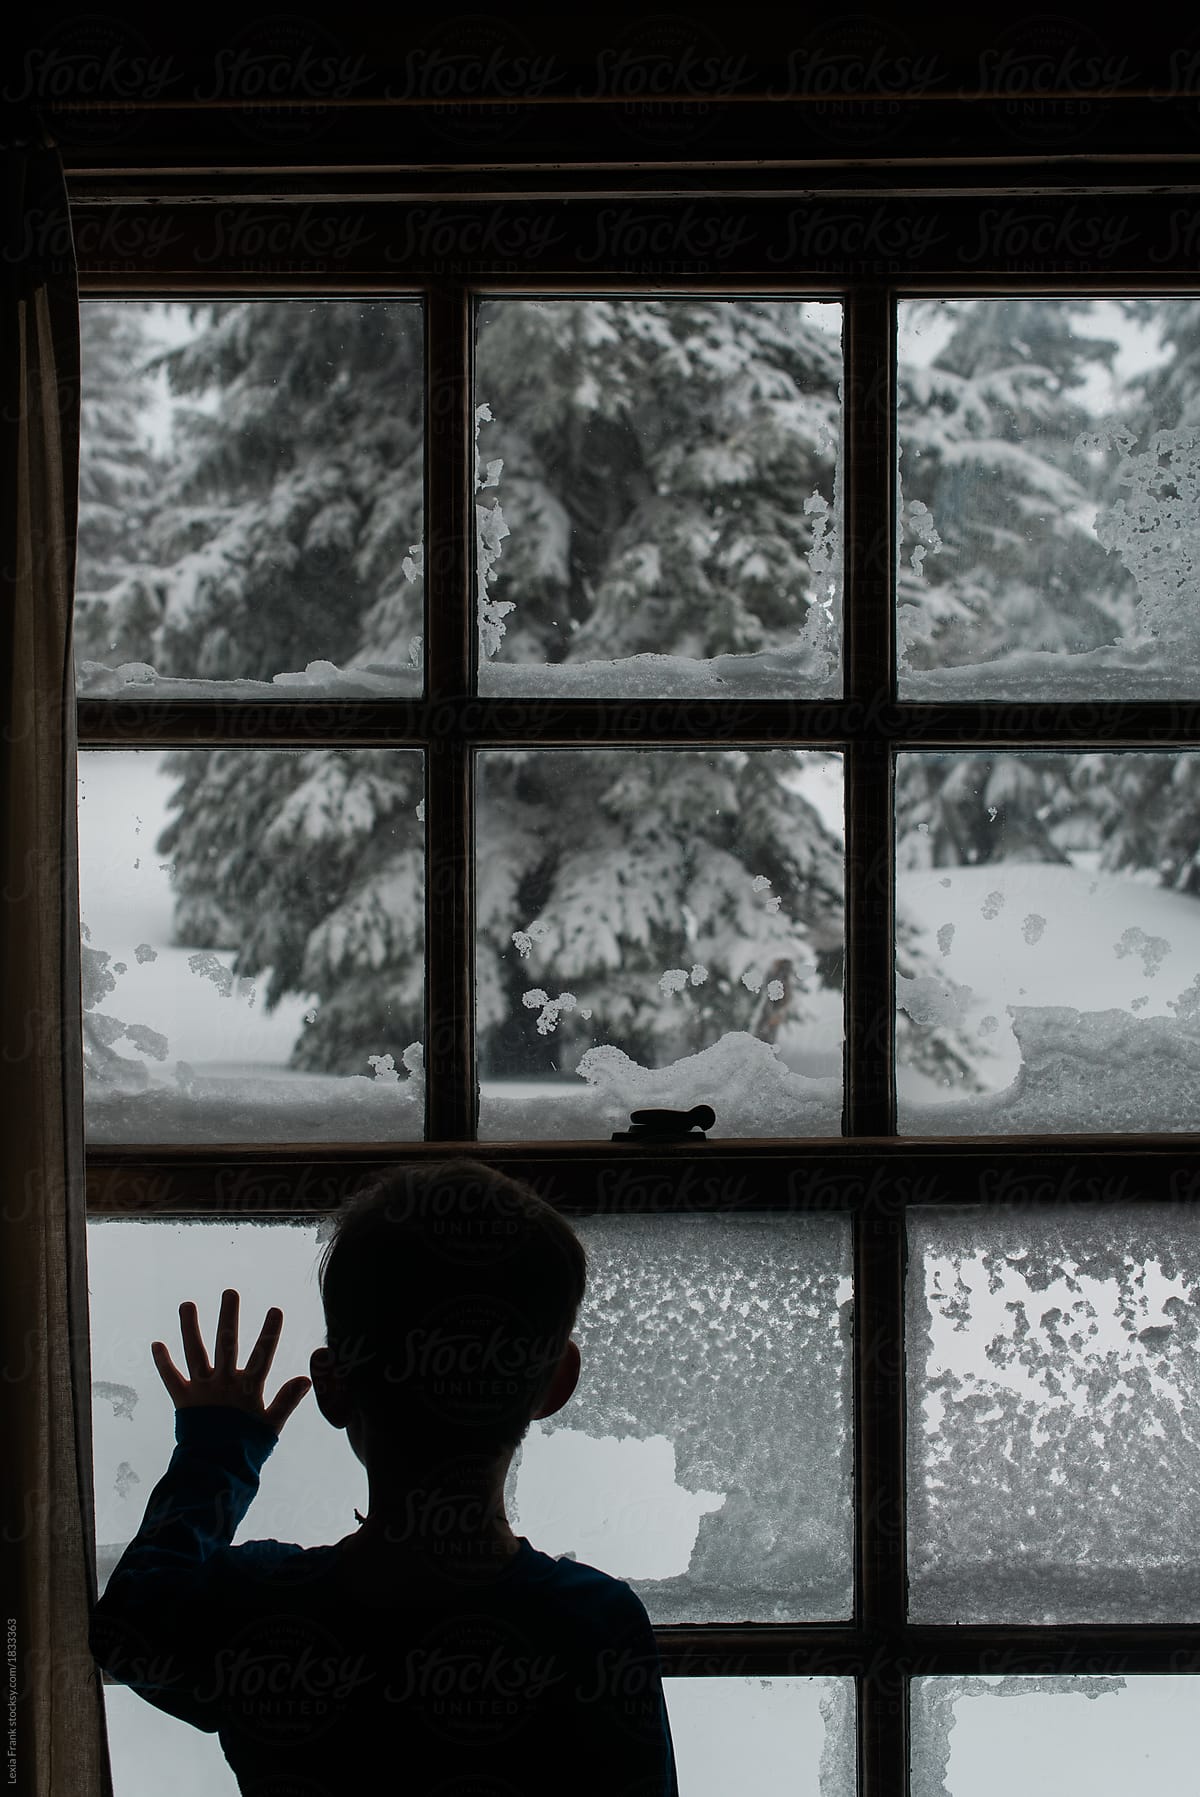 young boy dressed in snow gear looks out the snowy window at the winter landscape